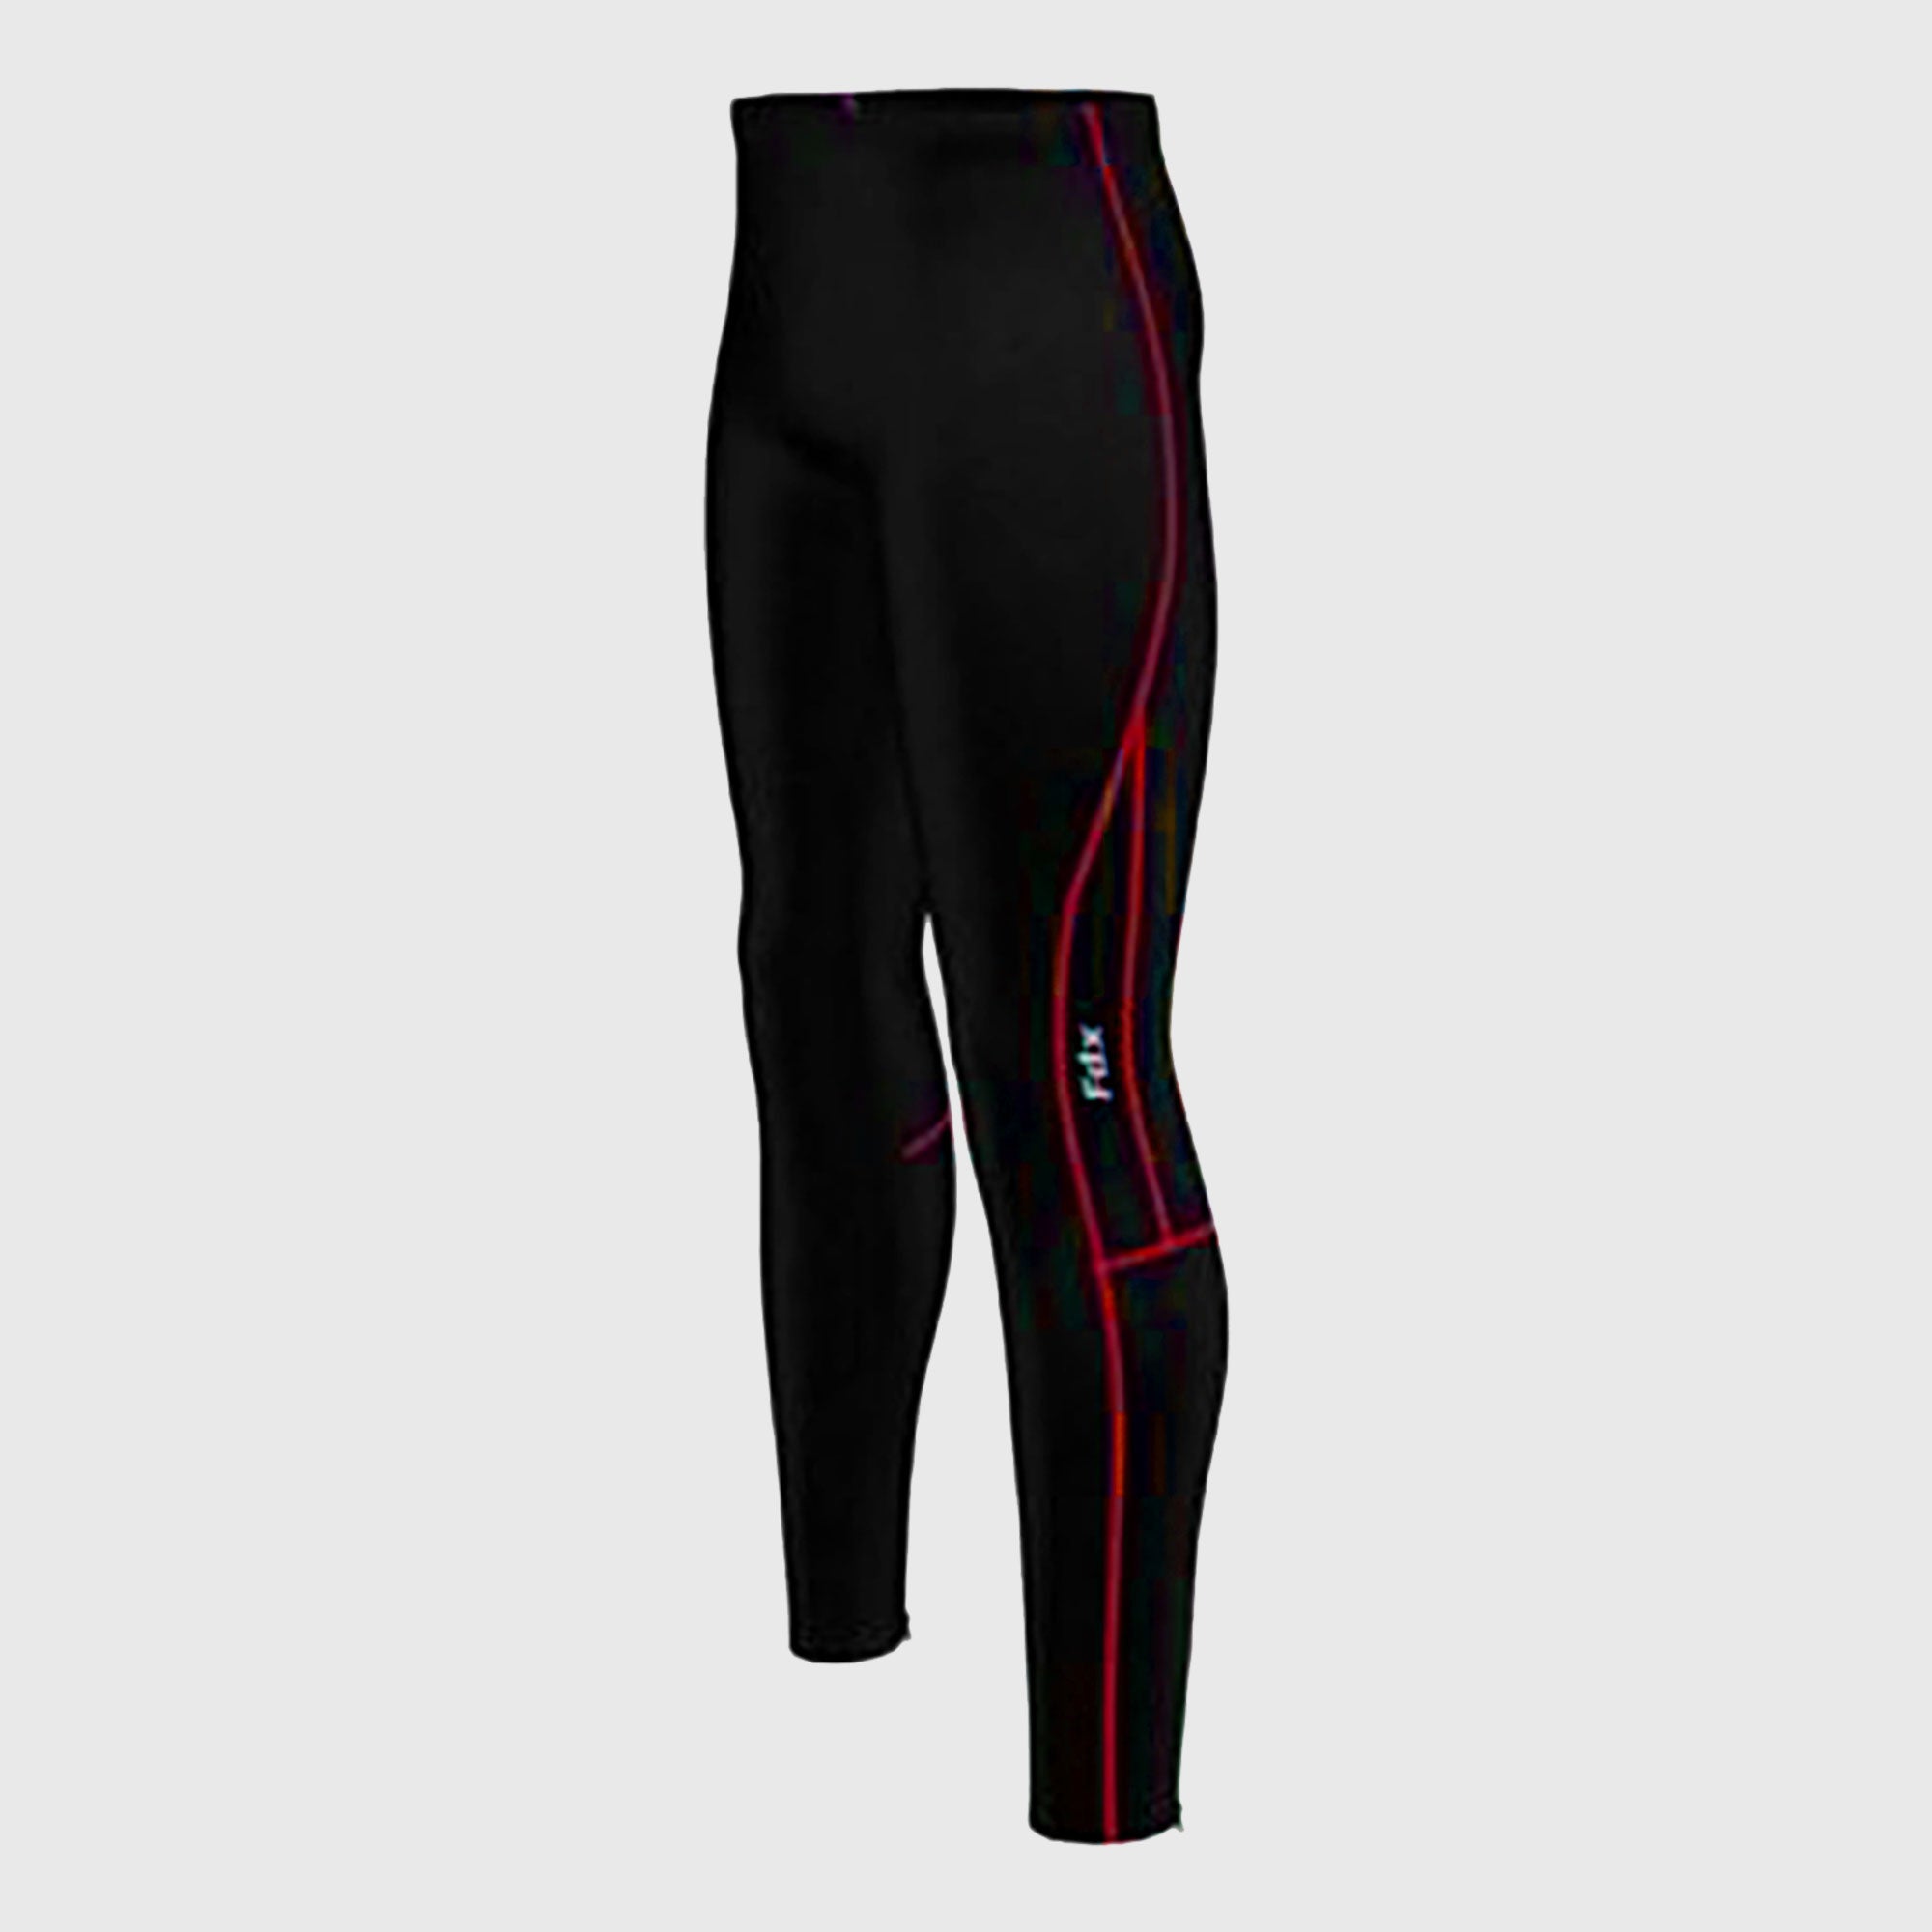 Fdx Thermolinx Men's Thermal All Season Compression Tights Red